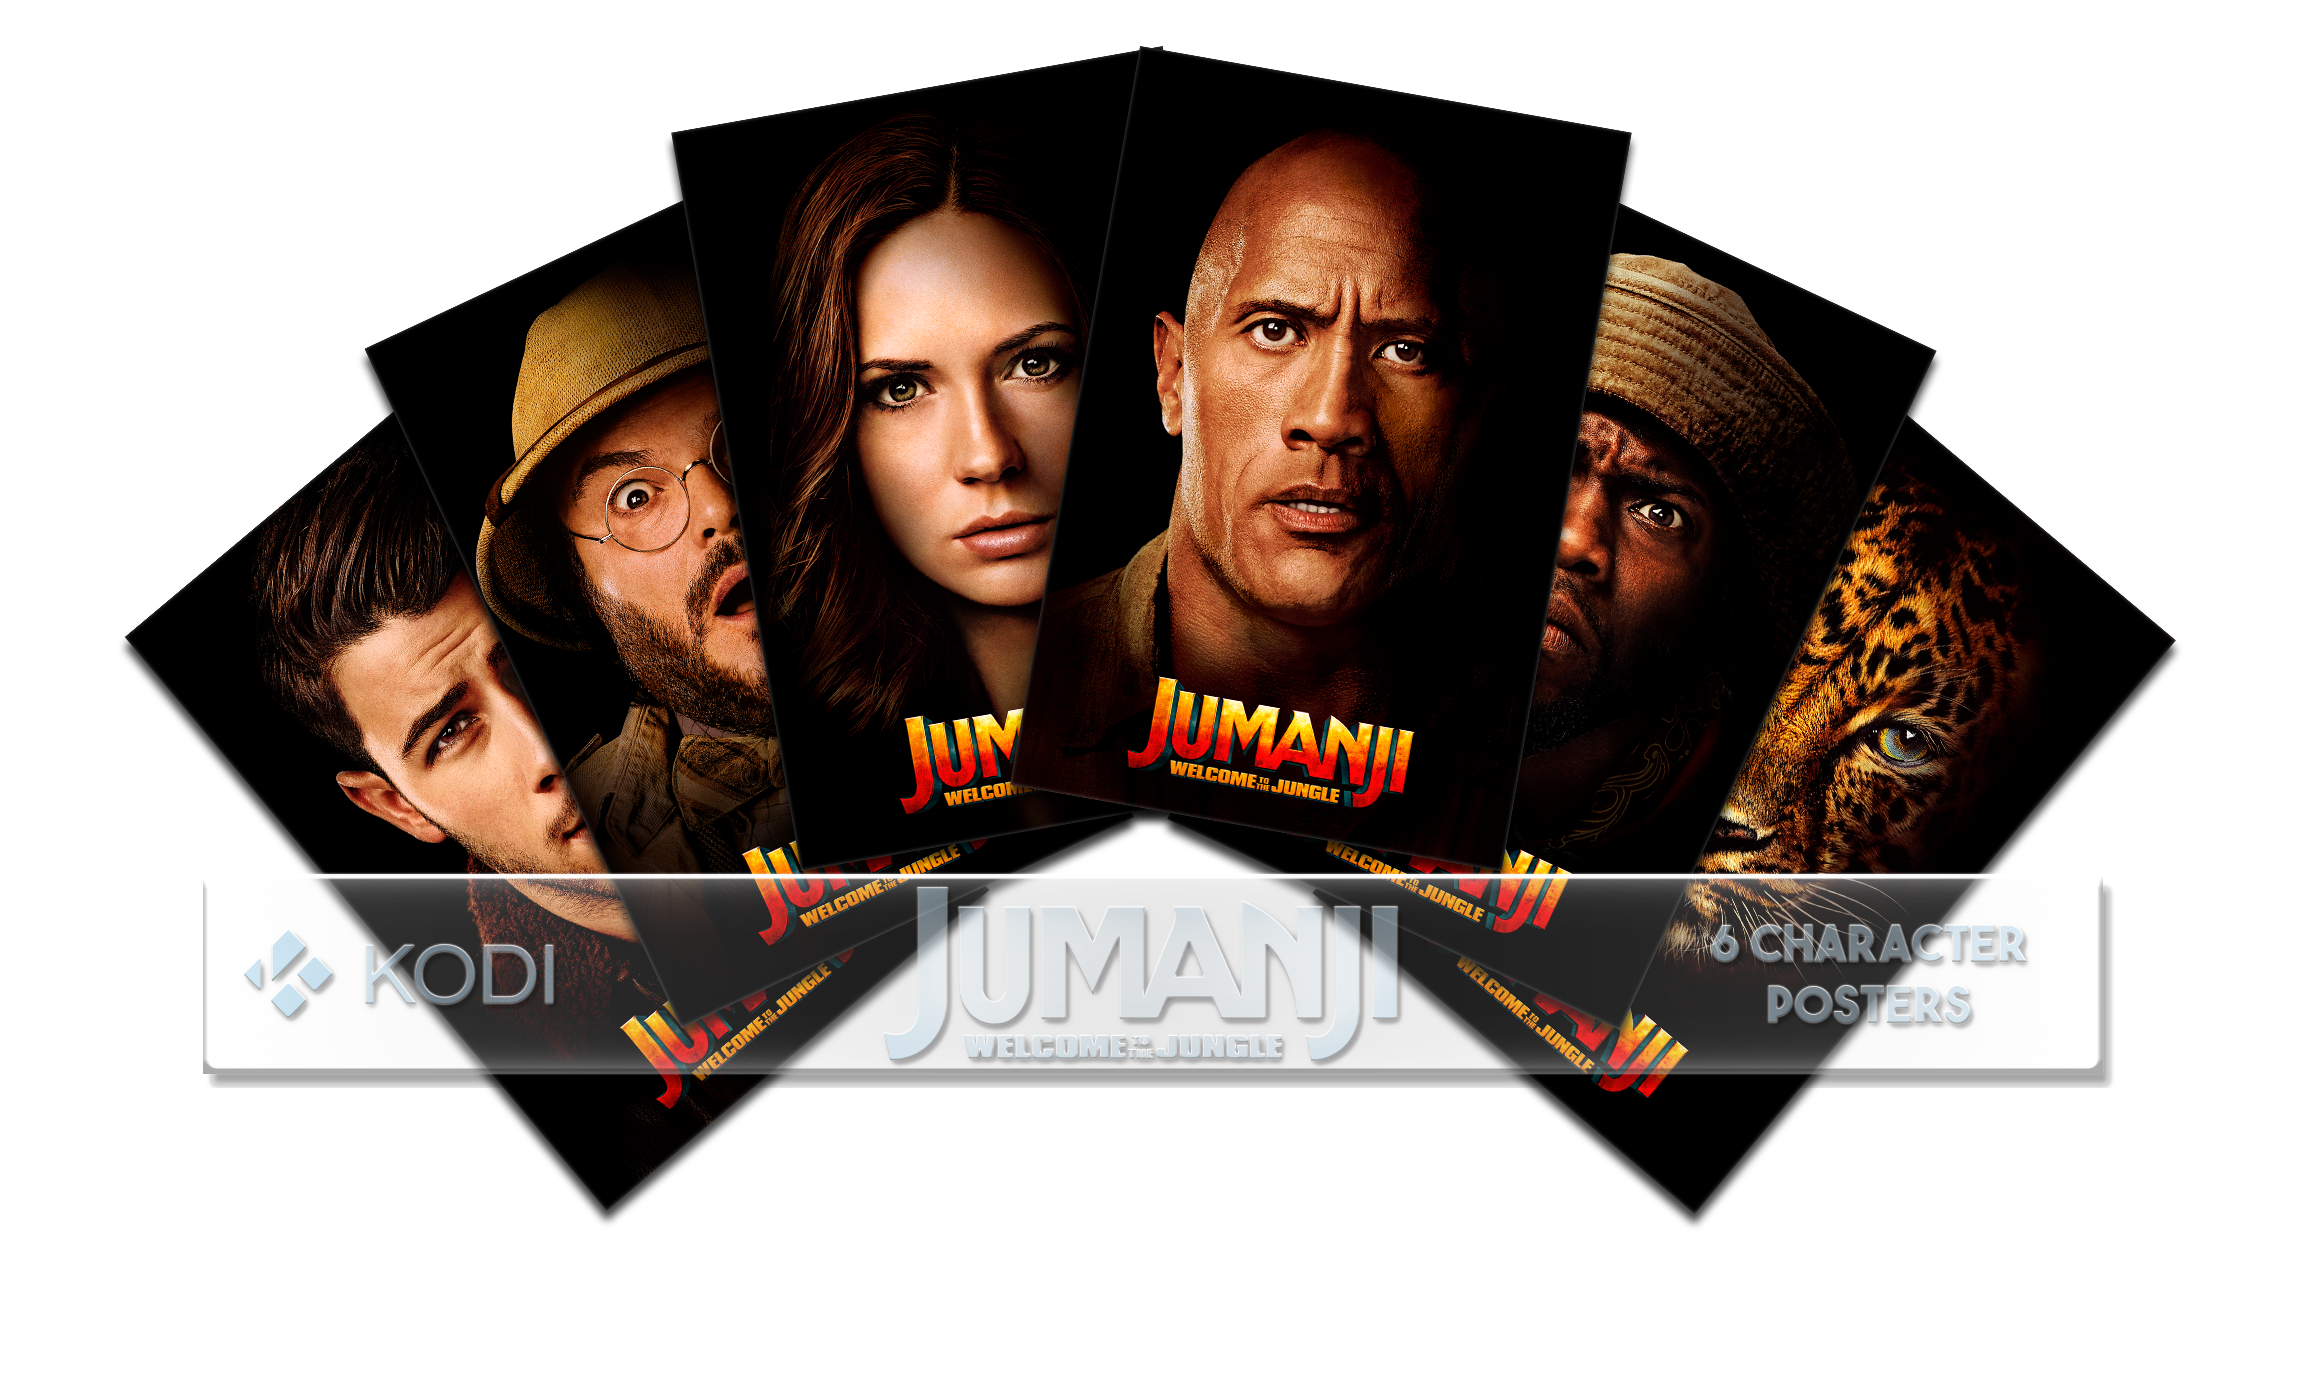 Jumanji Welcome To The Jungle Poster Wallpapers